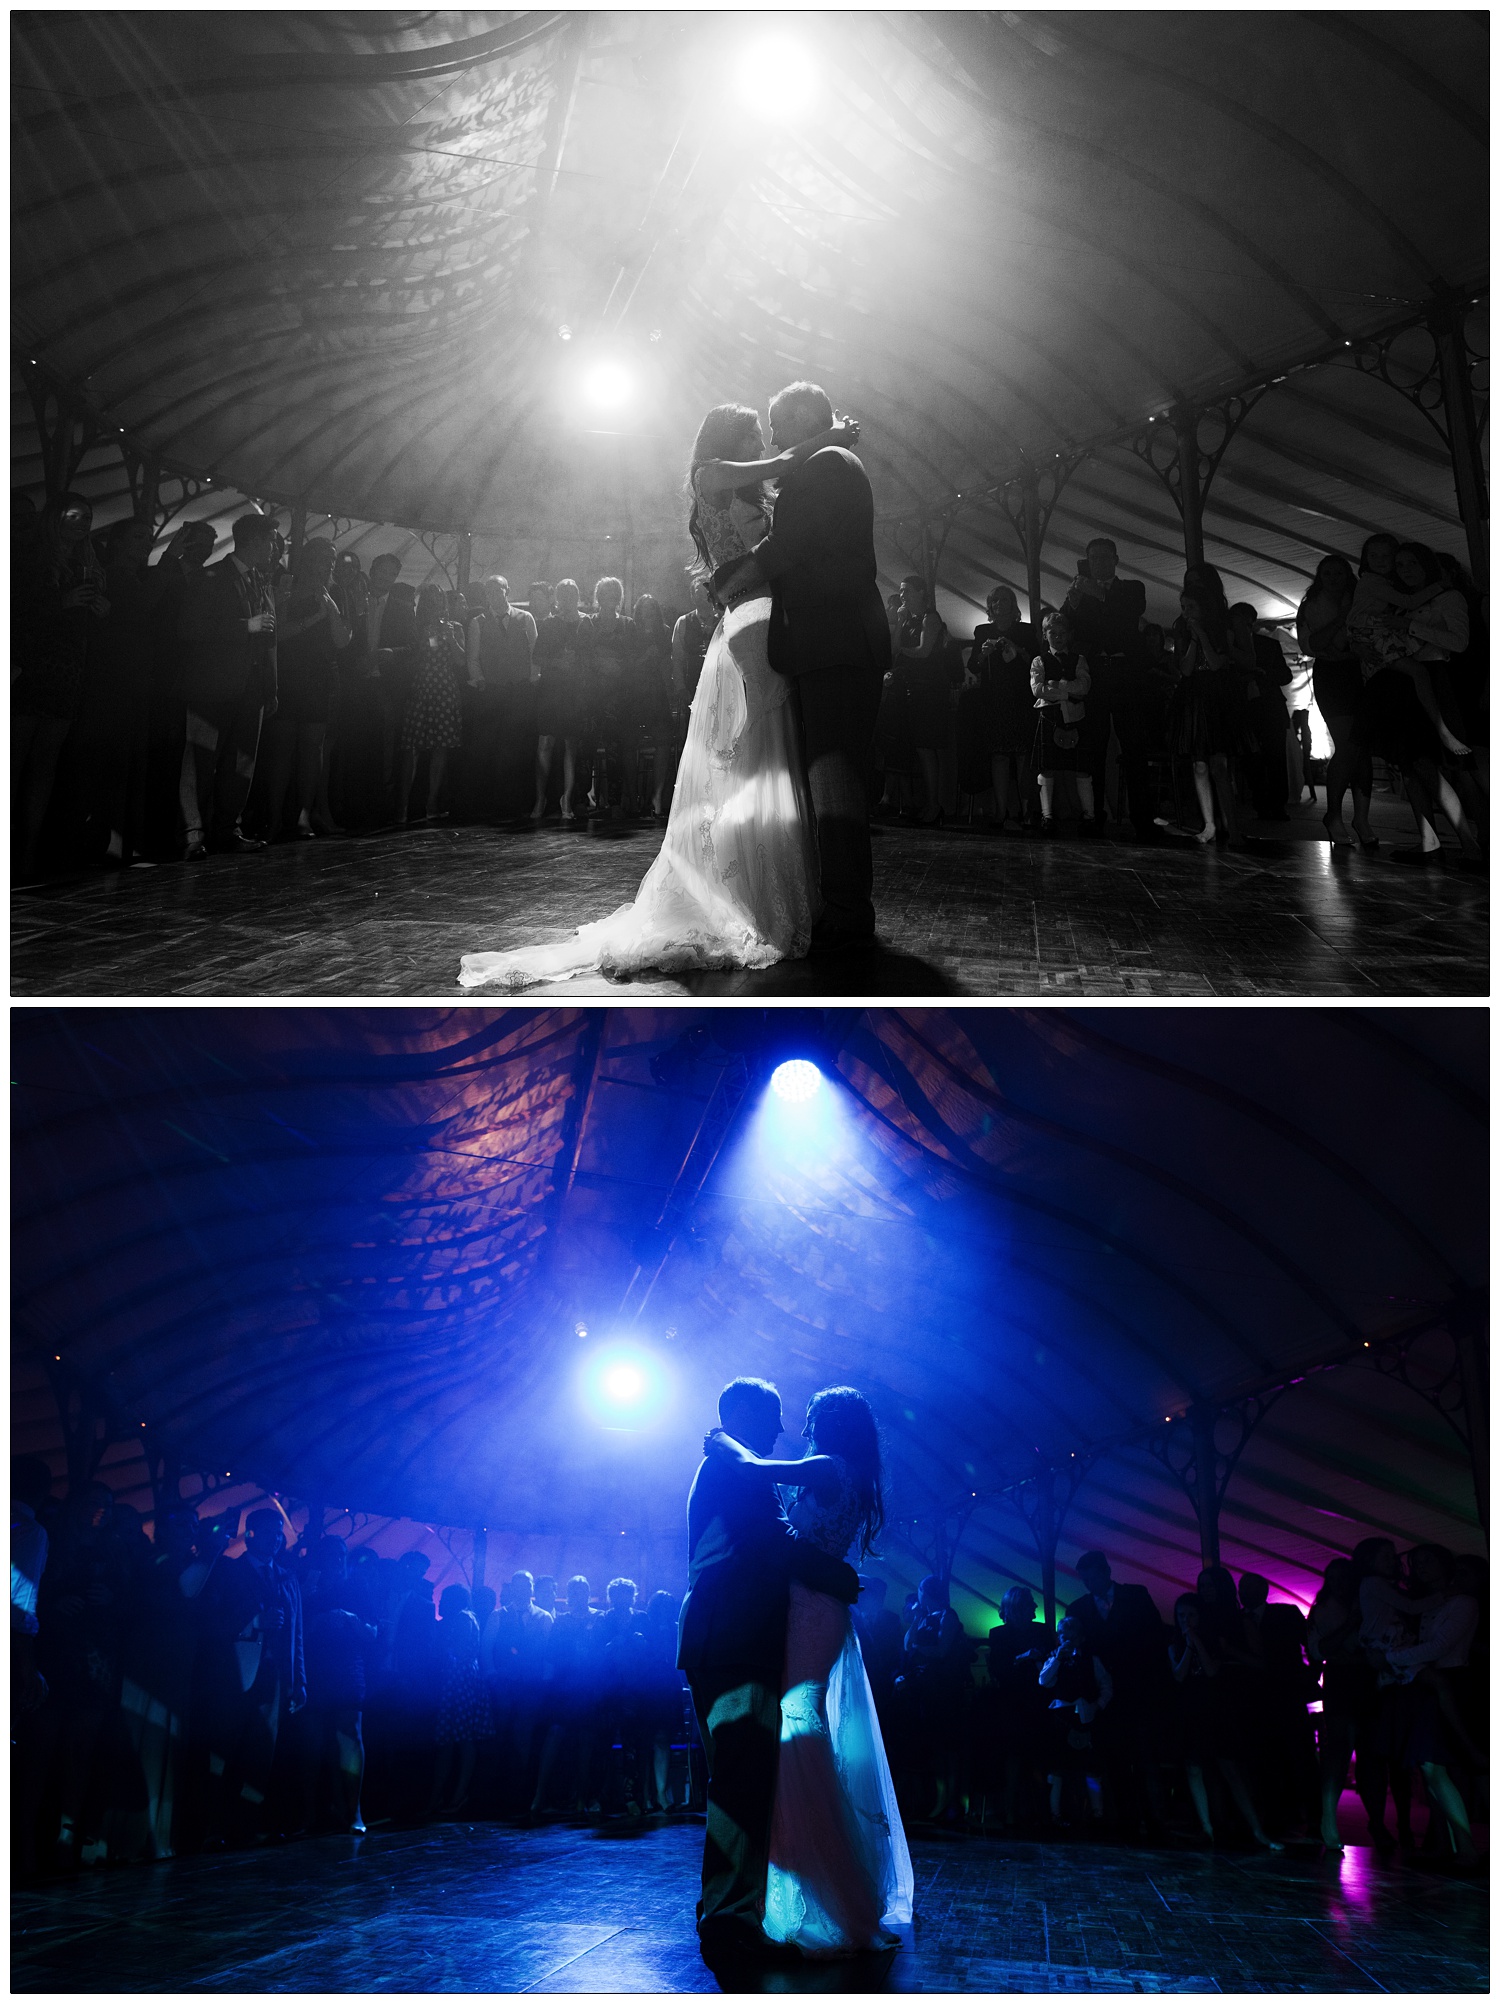 The first dance in an orangery event tent. The lights illuminating the bride and groom are blue. She is wearing a dress by Galia Lahav.